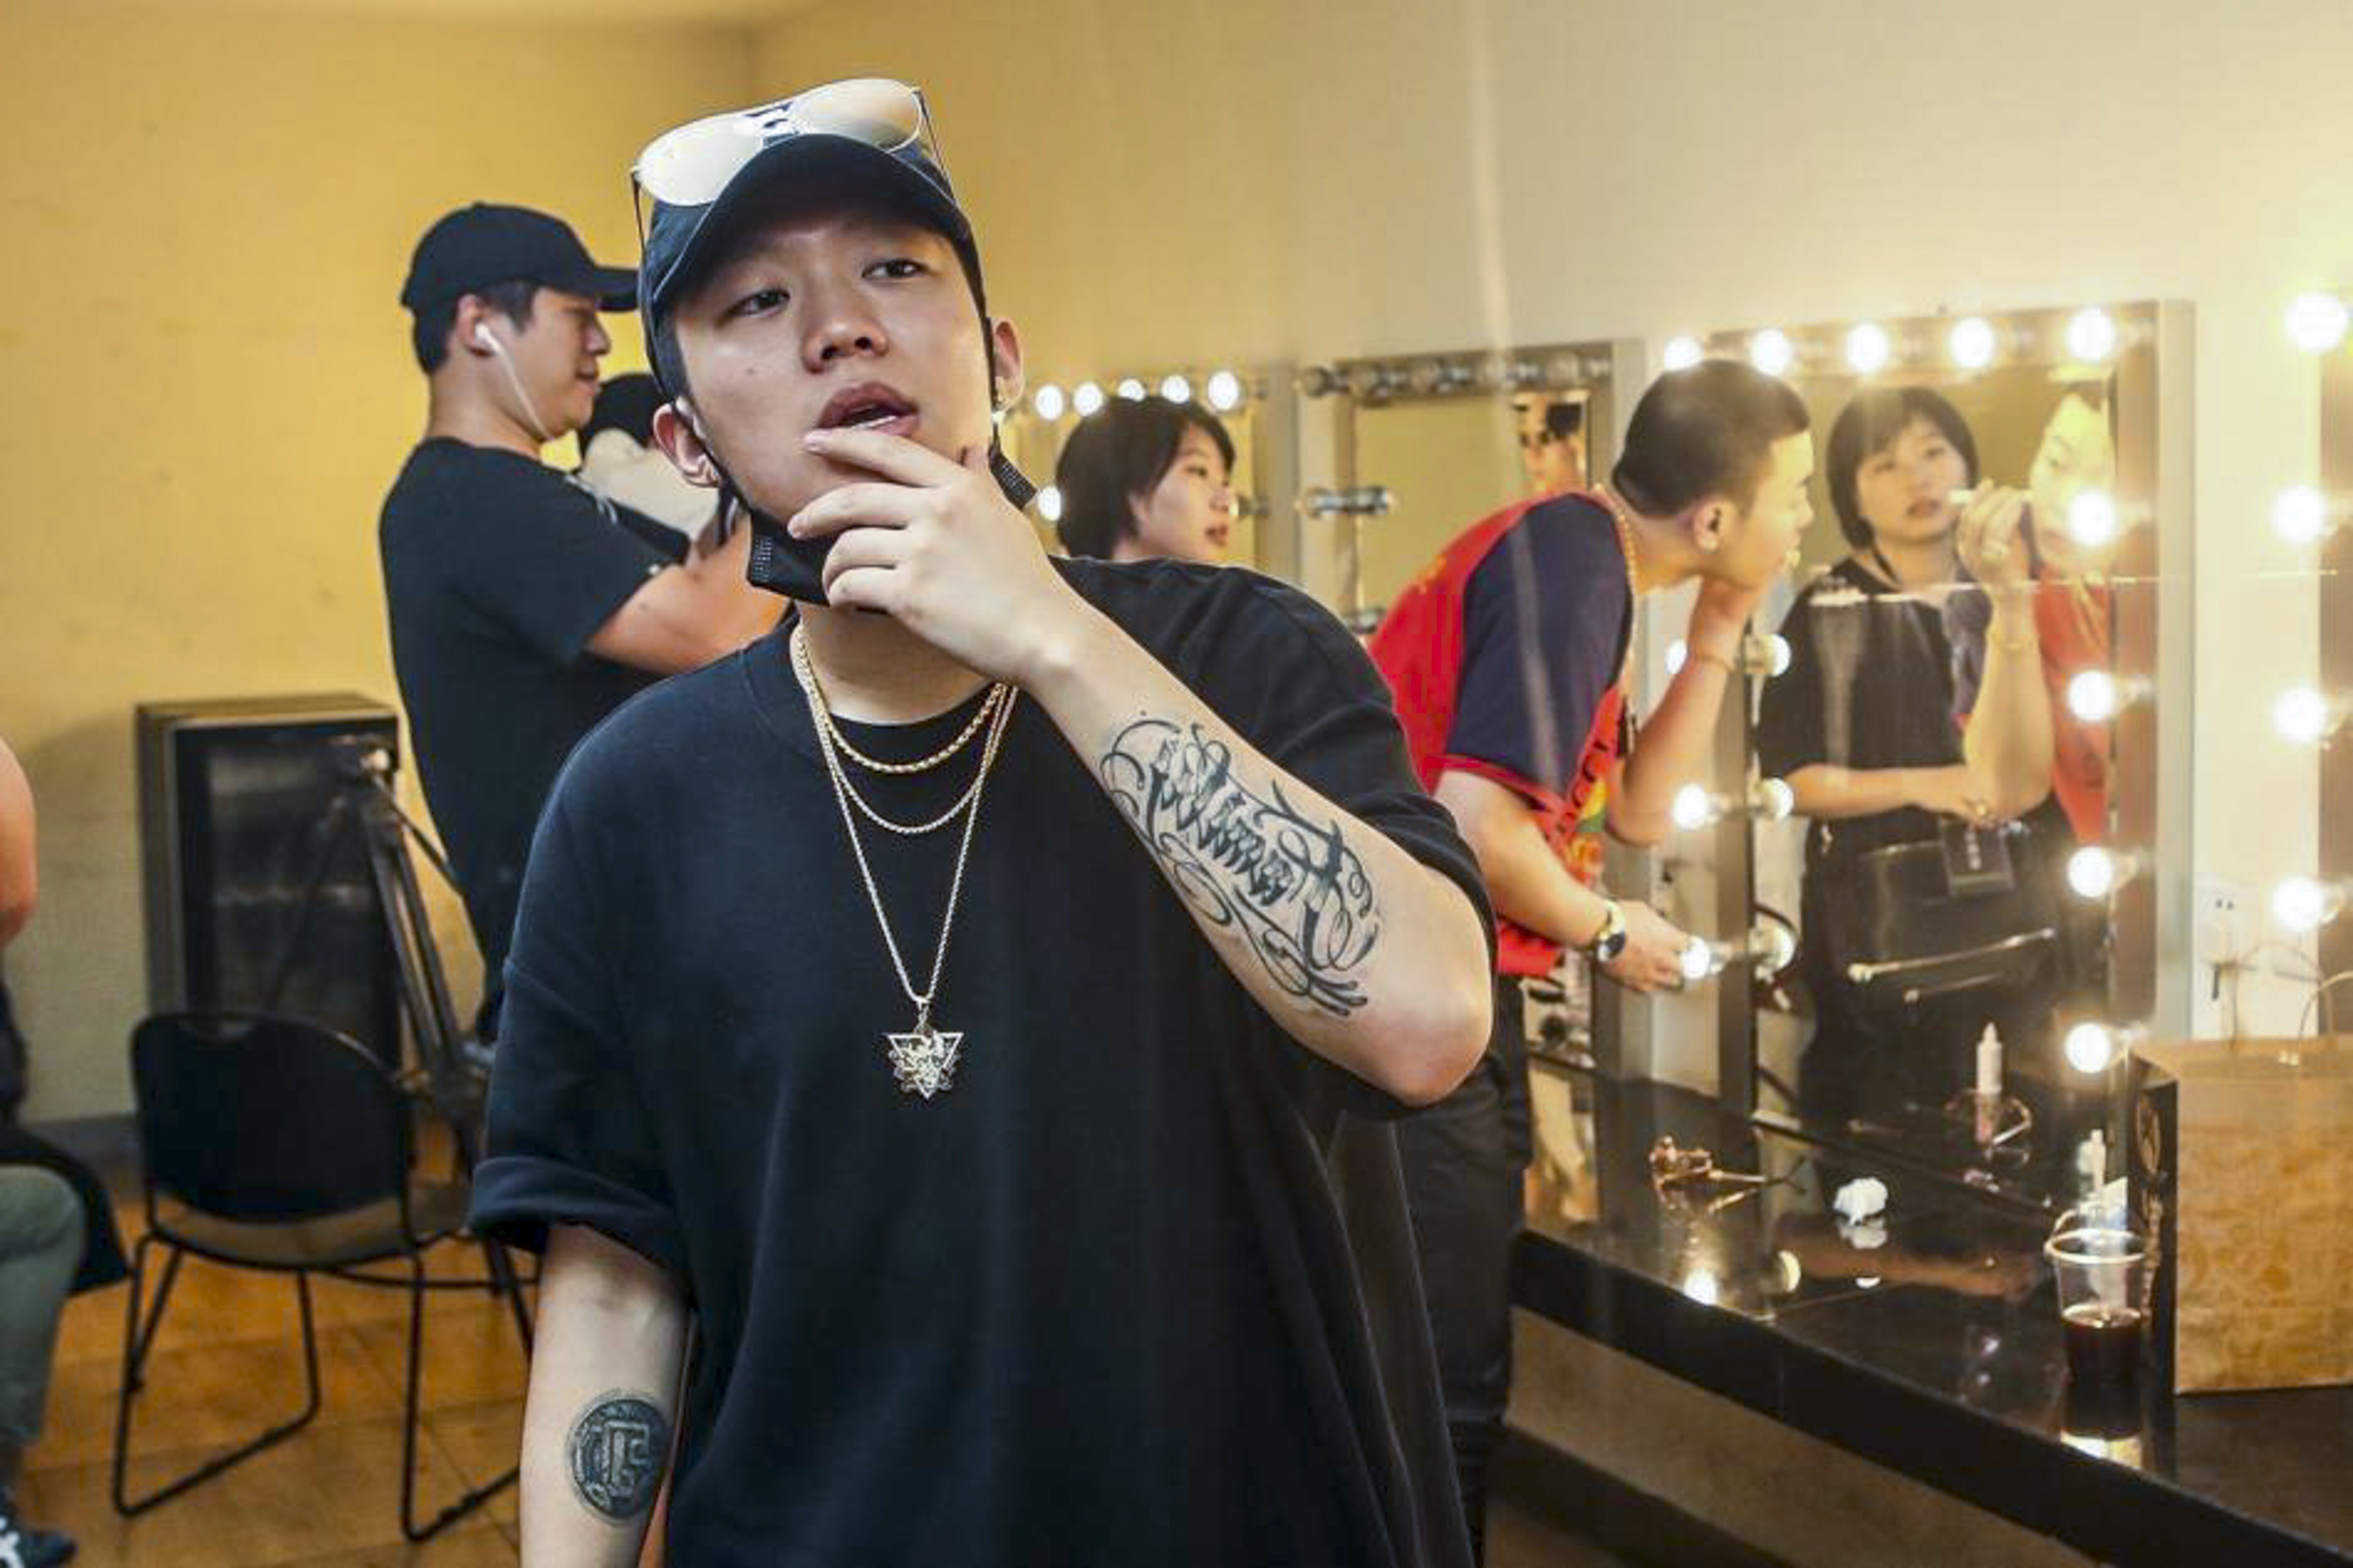 Chinese rapper Wang Hao, better known by his stage name PG One. Photo: sohu.com